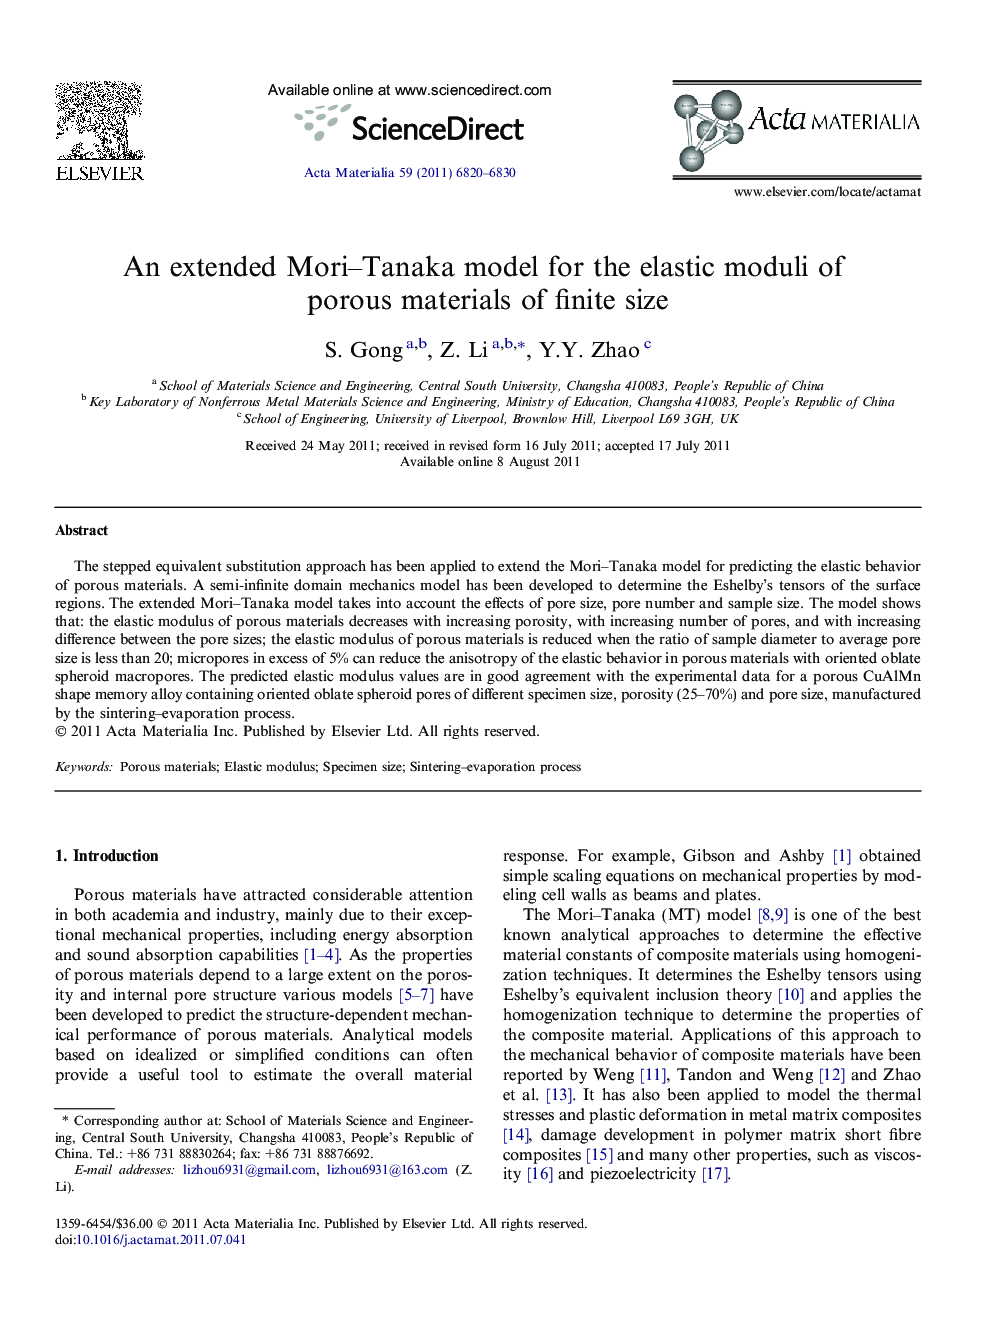 An extended Mori–Tanaka model for the elastic moduli of porous materials of finite size